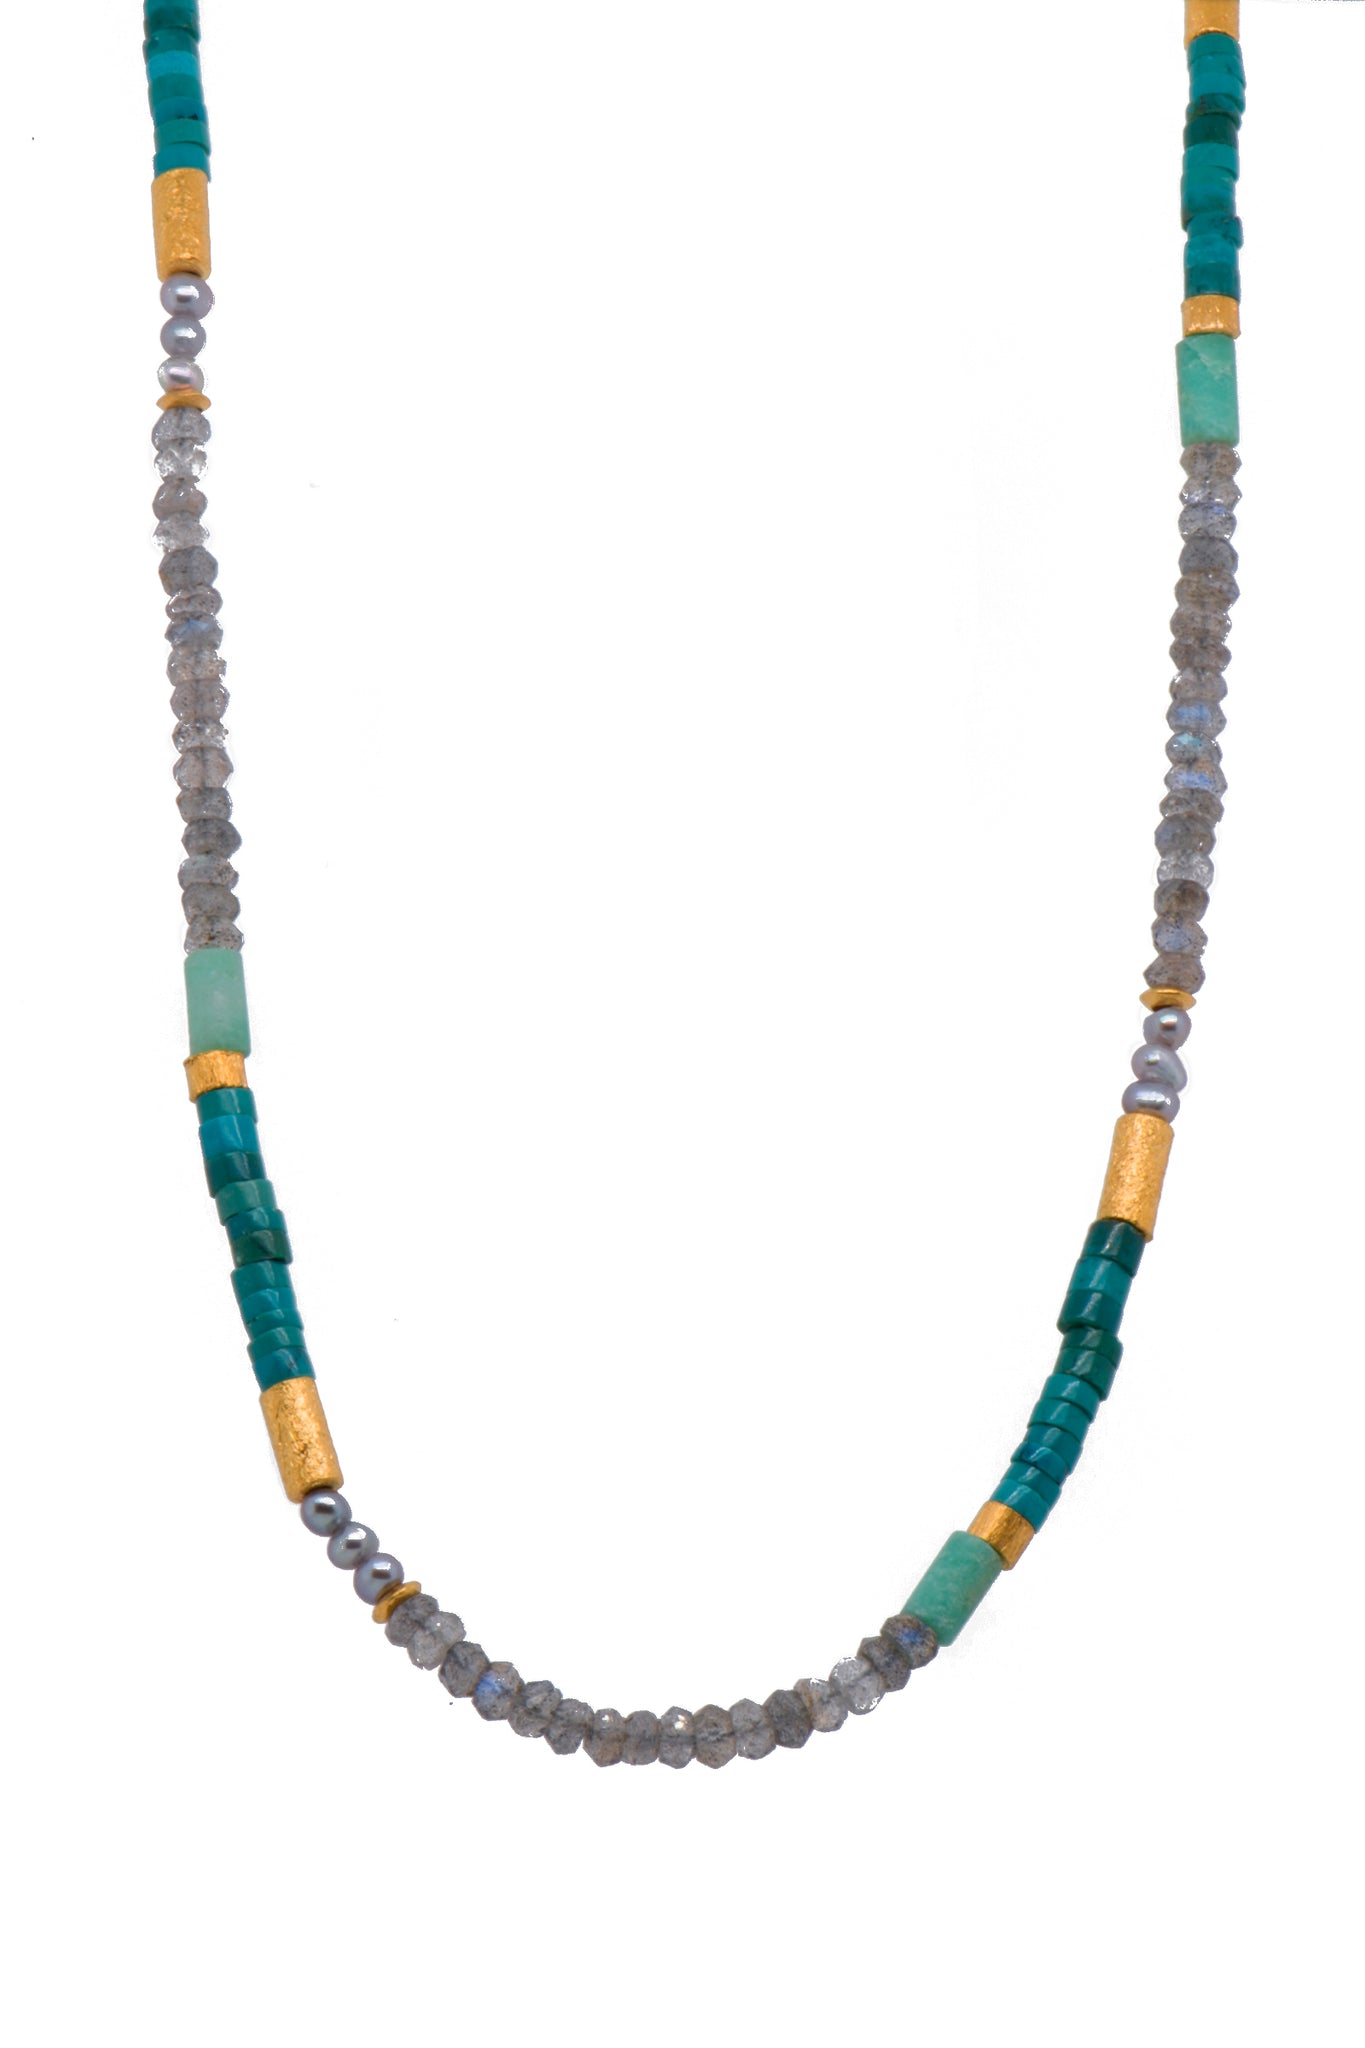 Turquoise, Chrysoprase, and Pearls Necklace 24K Fair Trade Gold Vermeil